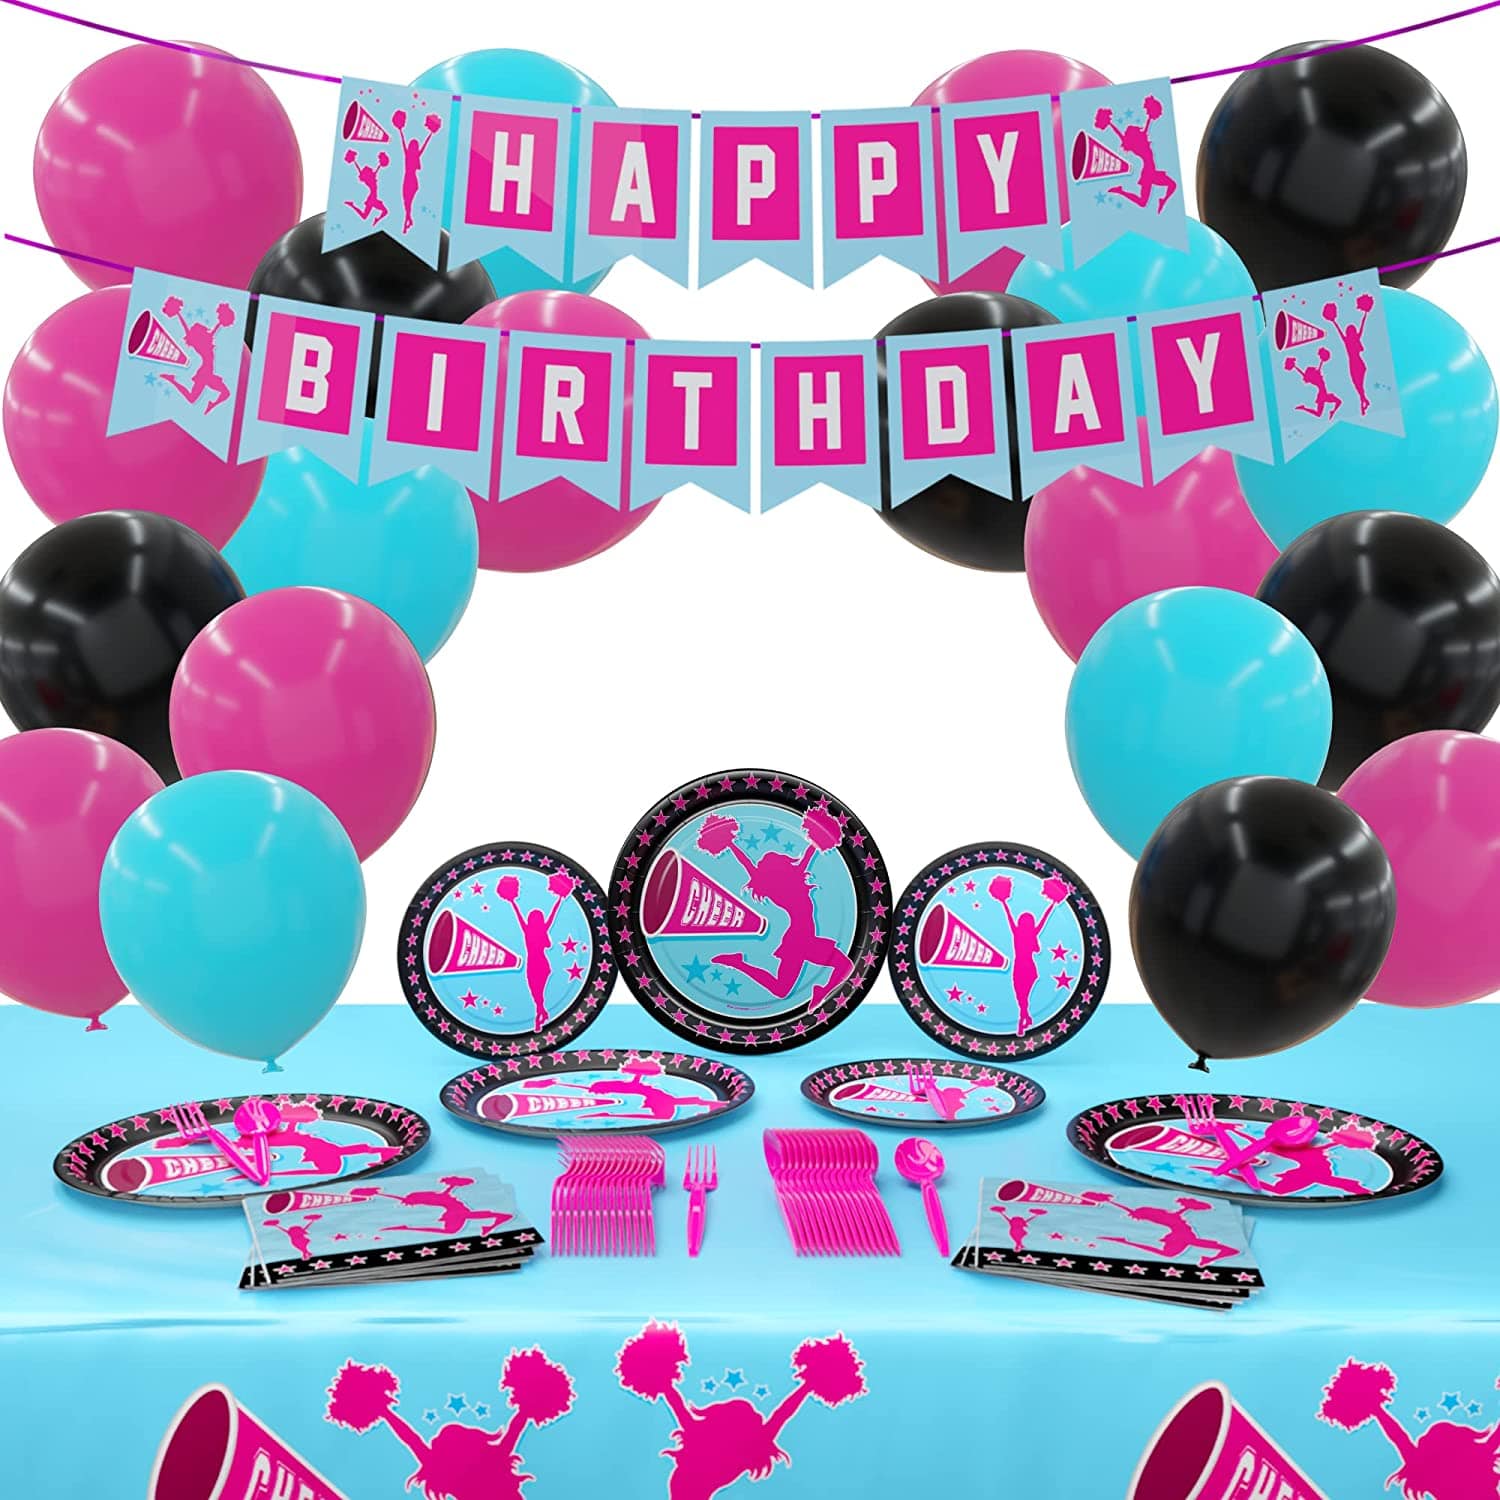 Contains: 9" Dinner Plates - 7" Dessert Plates - Lunch Napkins - Happy Birthday Banner - 108" x 54" Cheerleader Table Cover - Pink Balloons - Blue Balloons - Black Balloons - Hot Pink Spoons - Hot Pink Forks - Glue Dots.